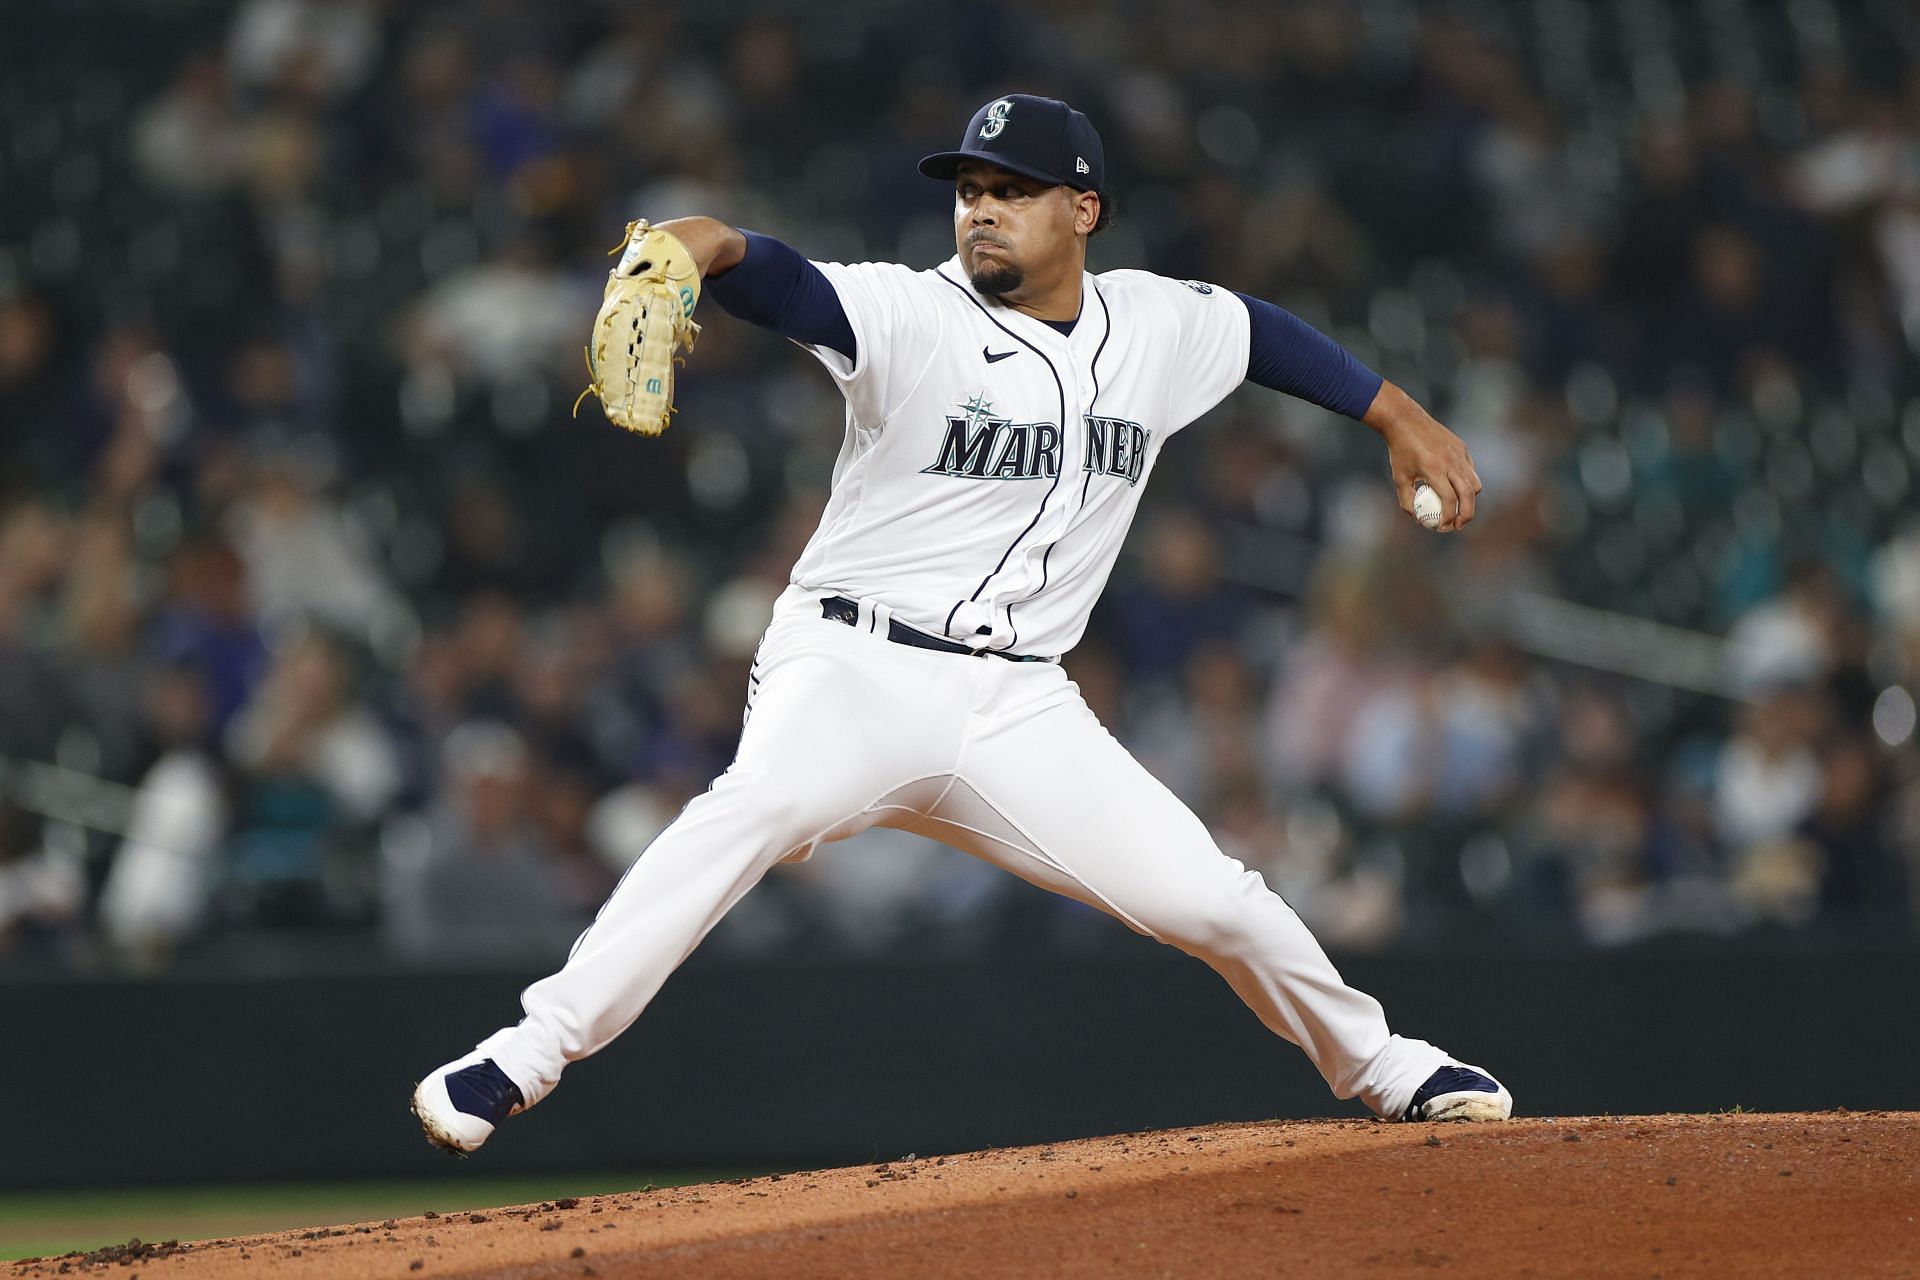 Justus Sheffield has played for the Yankees and Mariners